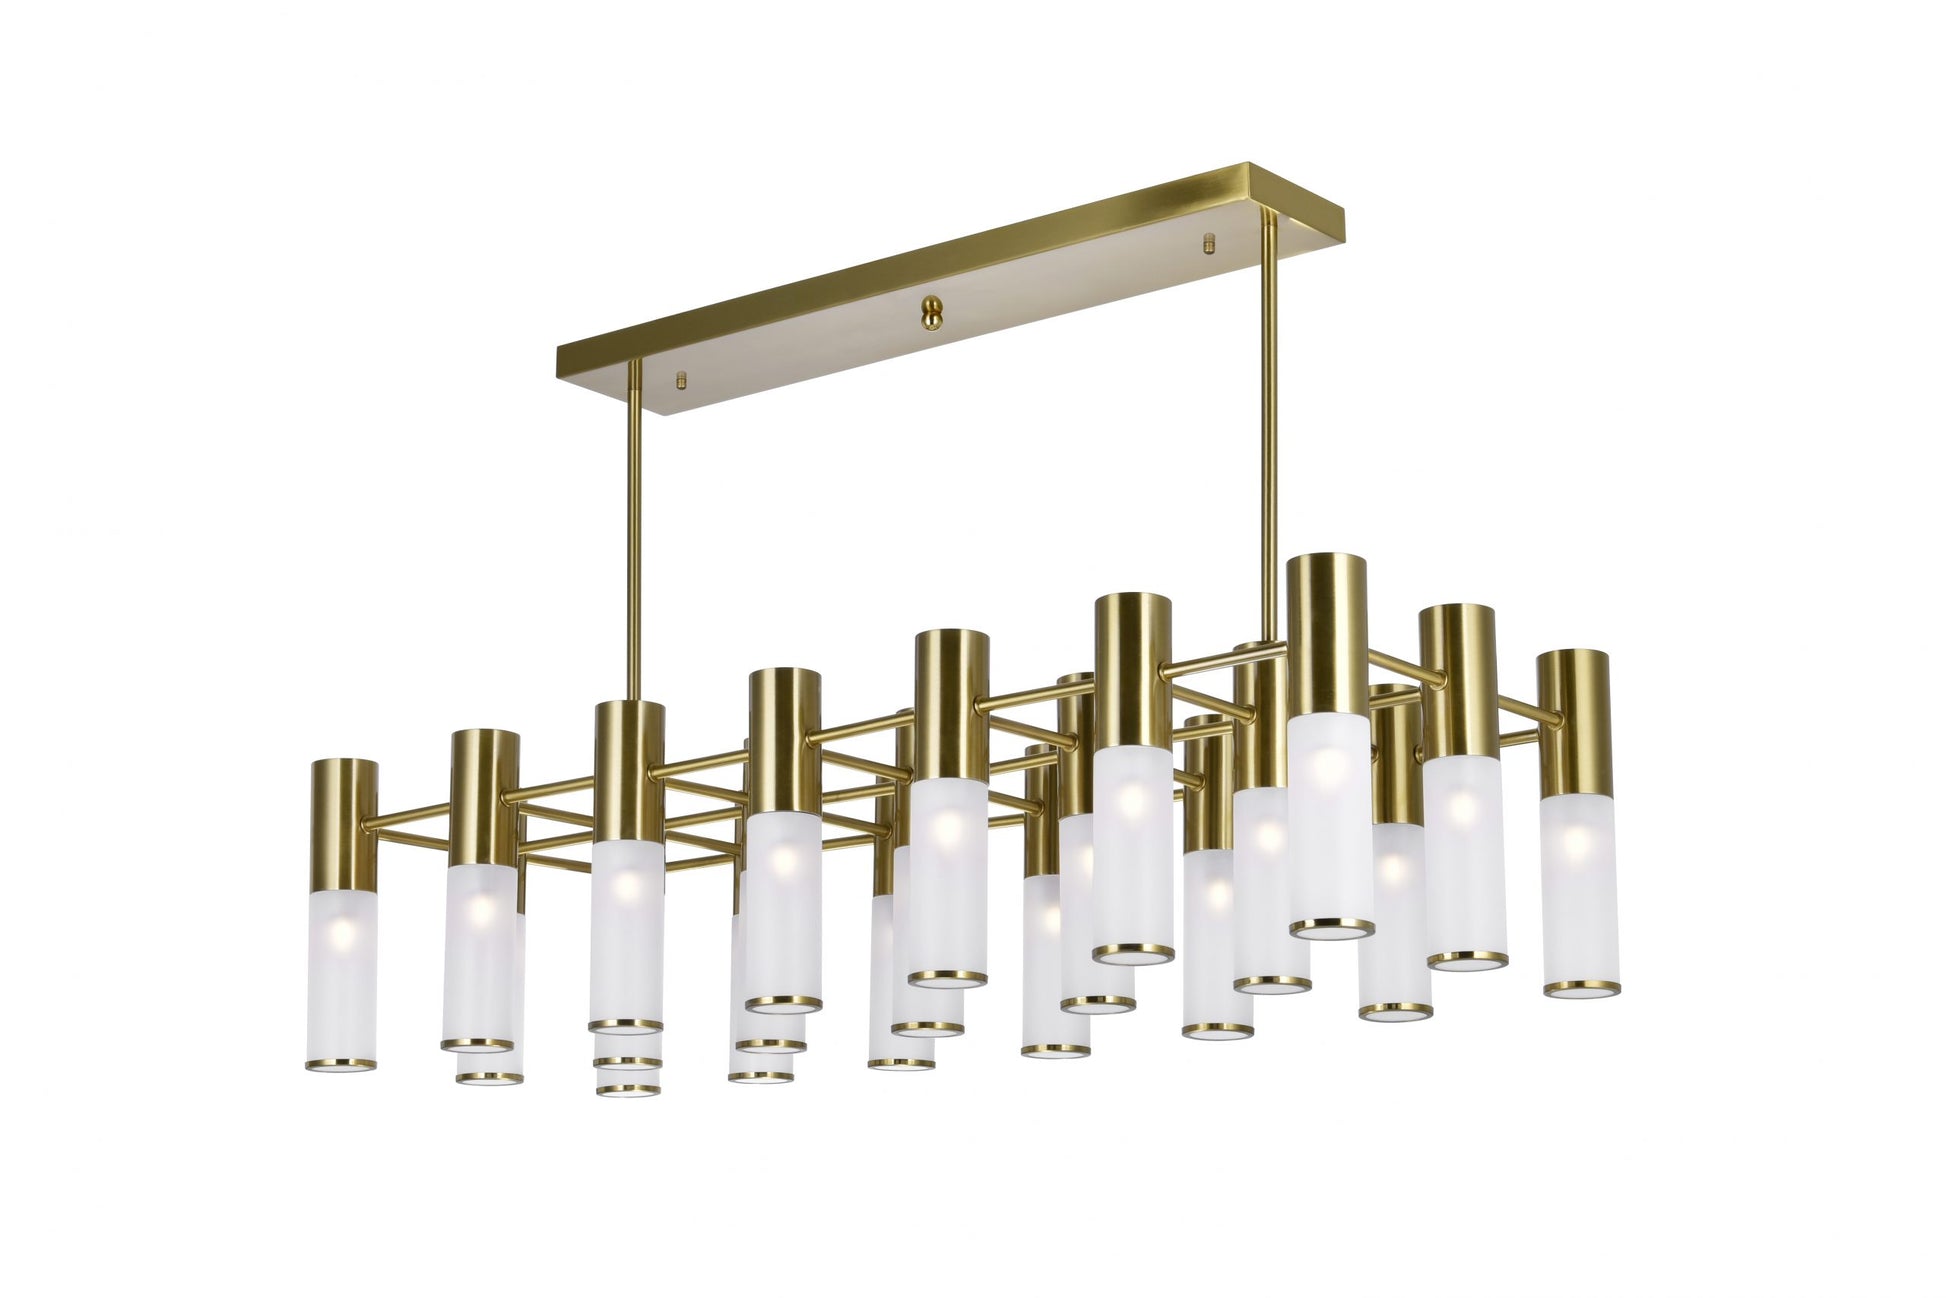 21 LIGHT ISLAND/POOL TABLE CHANDELIER WITH BRASS FINISH - Dreamart Gallery